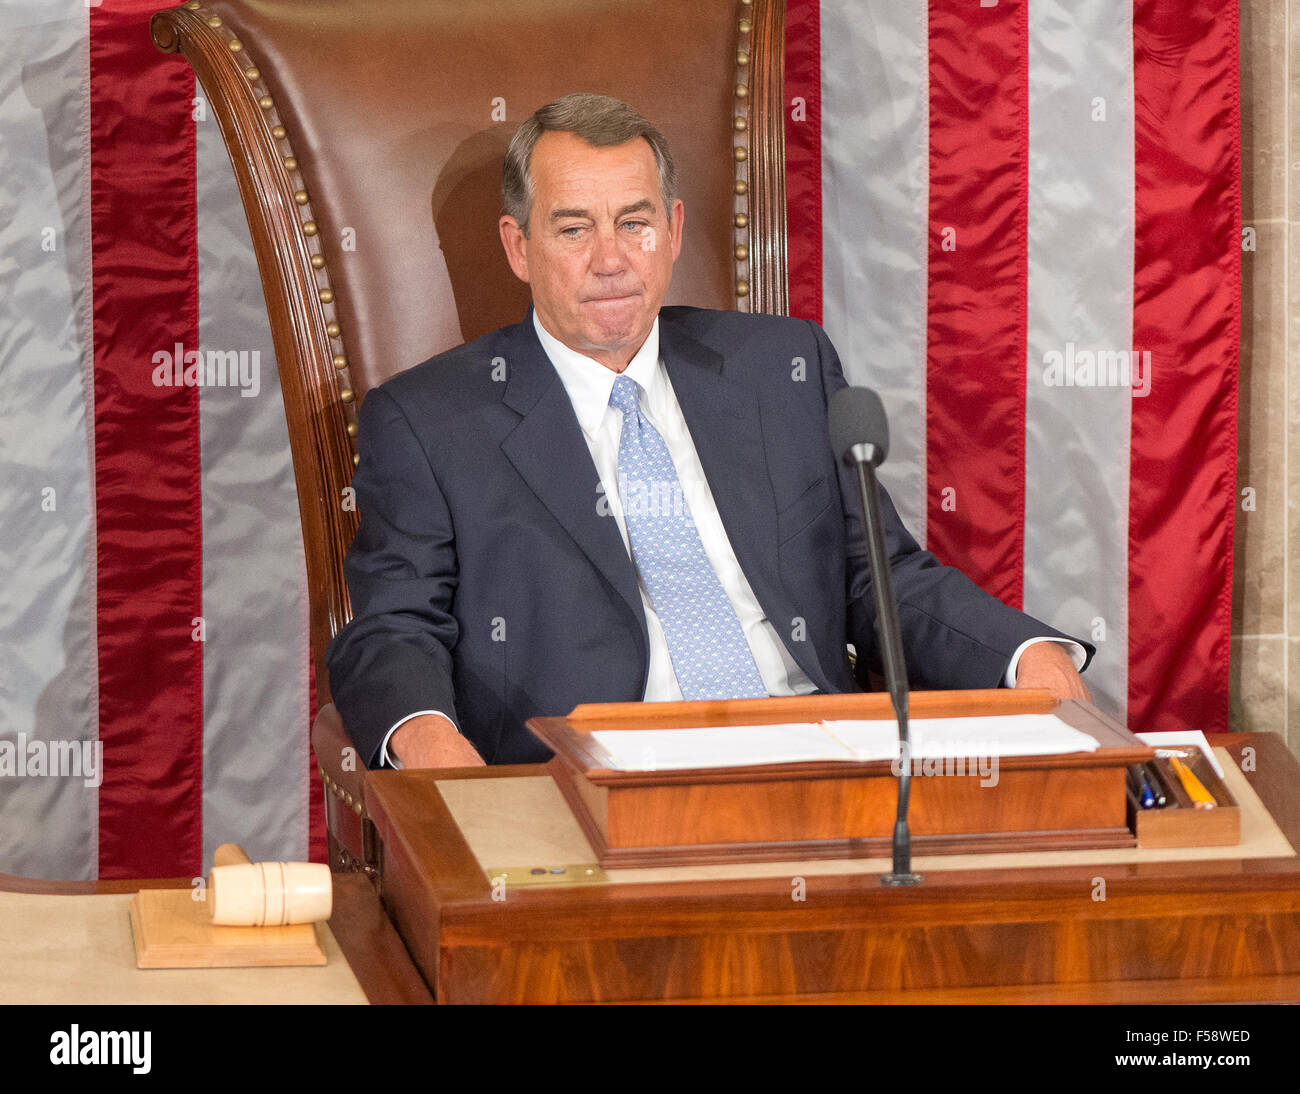 Washington, DC, USA. 29th October, 2015.  Outgoing Speaker of the United States House of Representatives John Boehner (Republican of Ohio) appears lost in thought as he sits in the Speaker's chair for the last time in the US House Chamber in the US Capitol in Washington, DC on Thursday, October 29, 2015. Credit:  dpa picture alliance/Alamy Live News Stock Photo